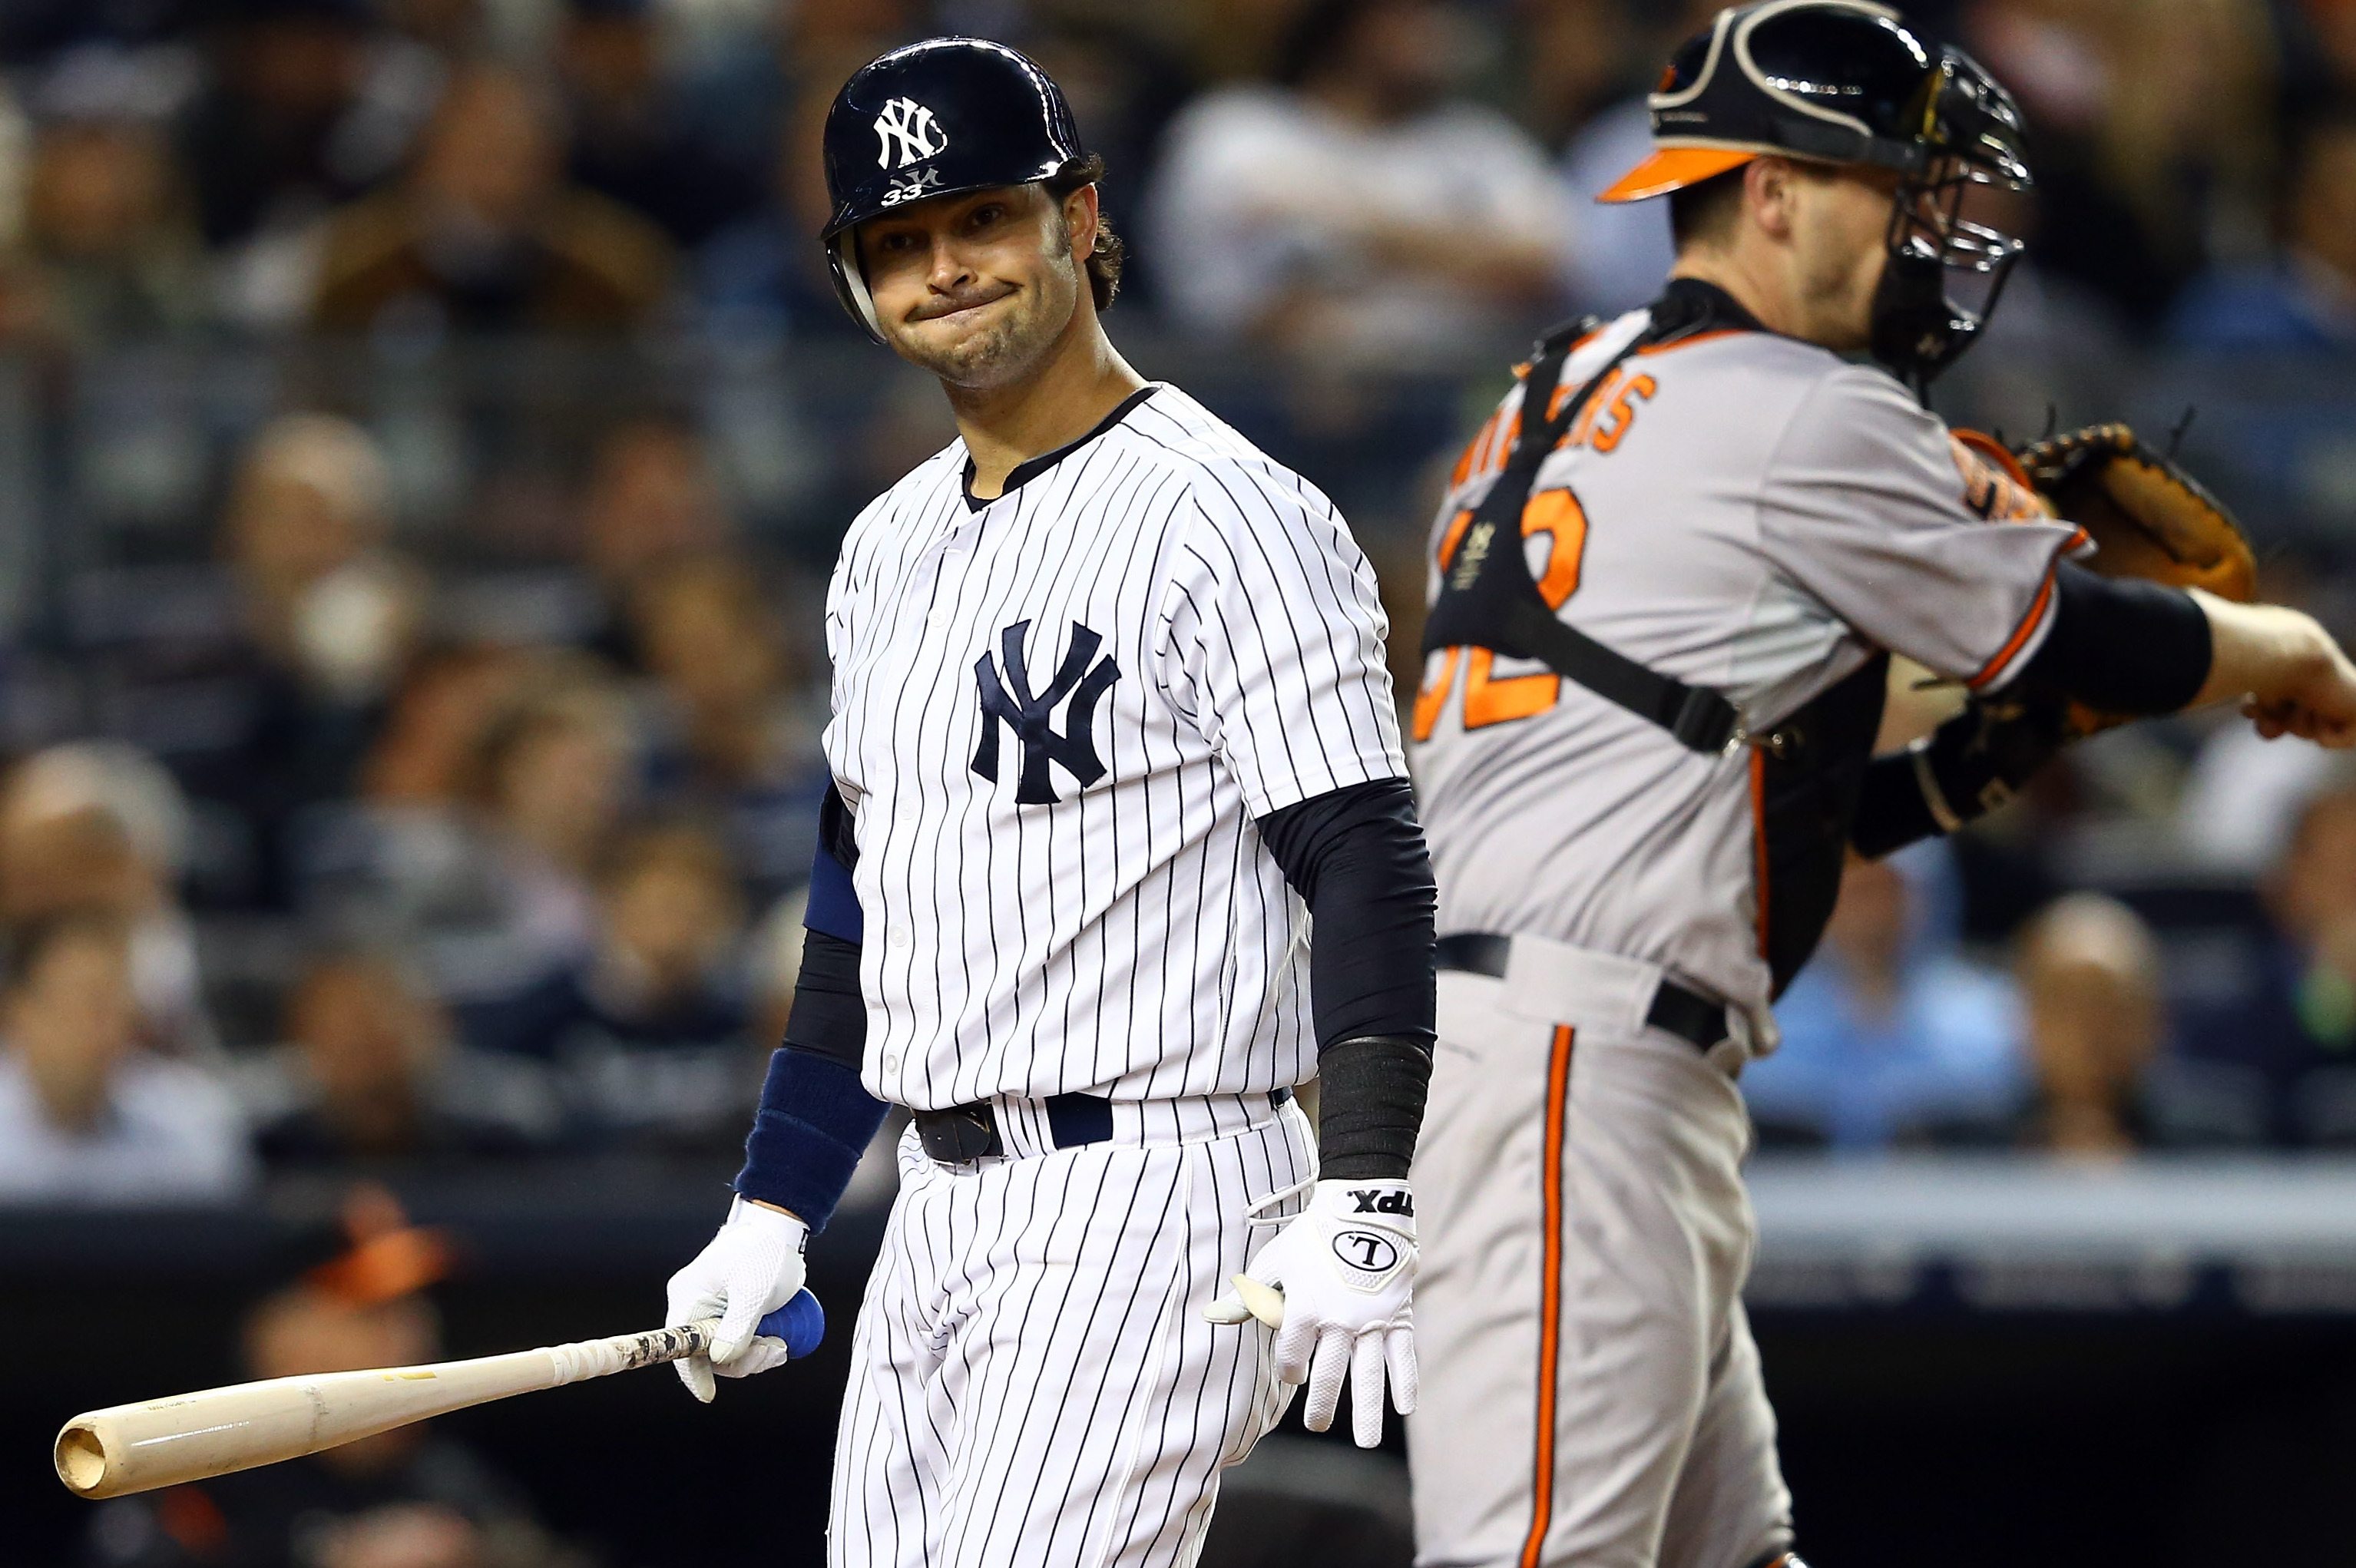 Nov. 13, 2008: When the Yankees brought Nick Swisher and sunshine